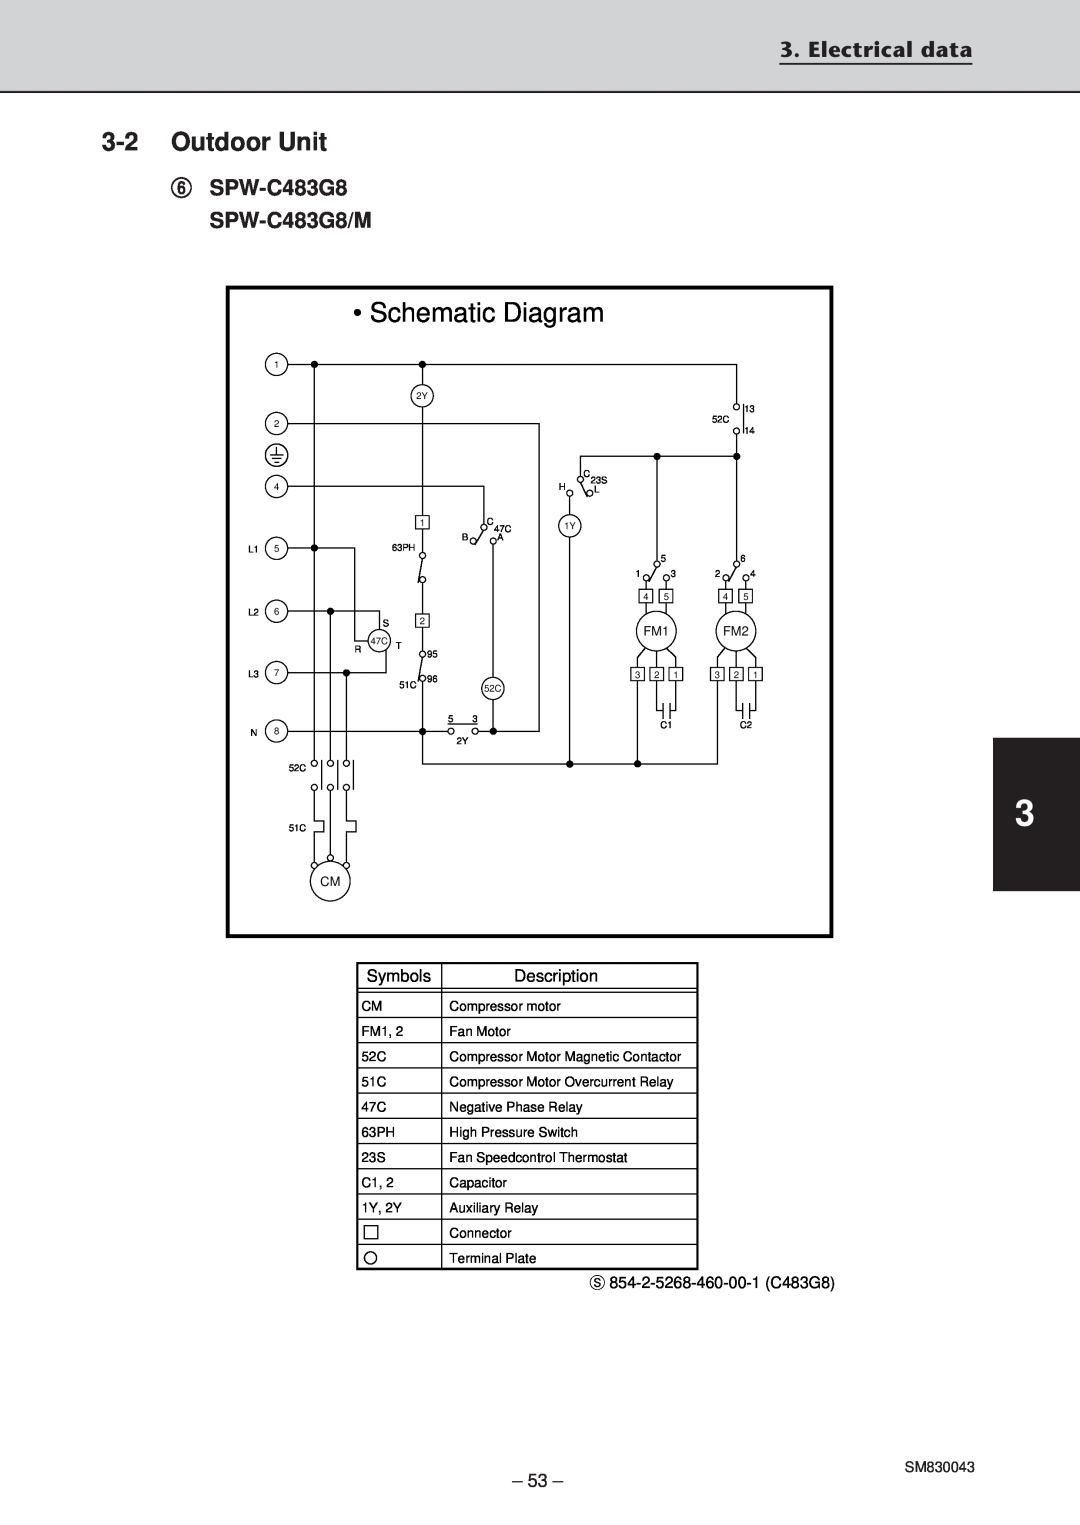 Sanyo SPW-T253G56, SPW-T363GS56, SPW-T483G56 Schematic Diagram, 3-2Outdoor Unit, Electrical data, SPW-C483G8/M 